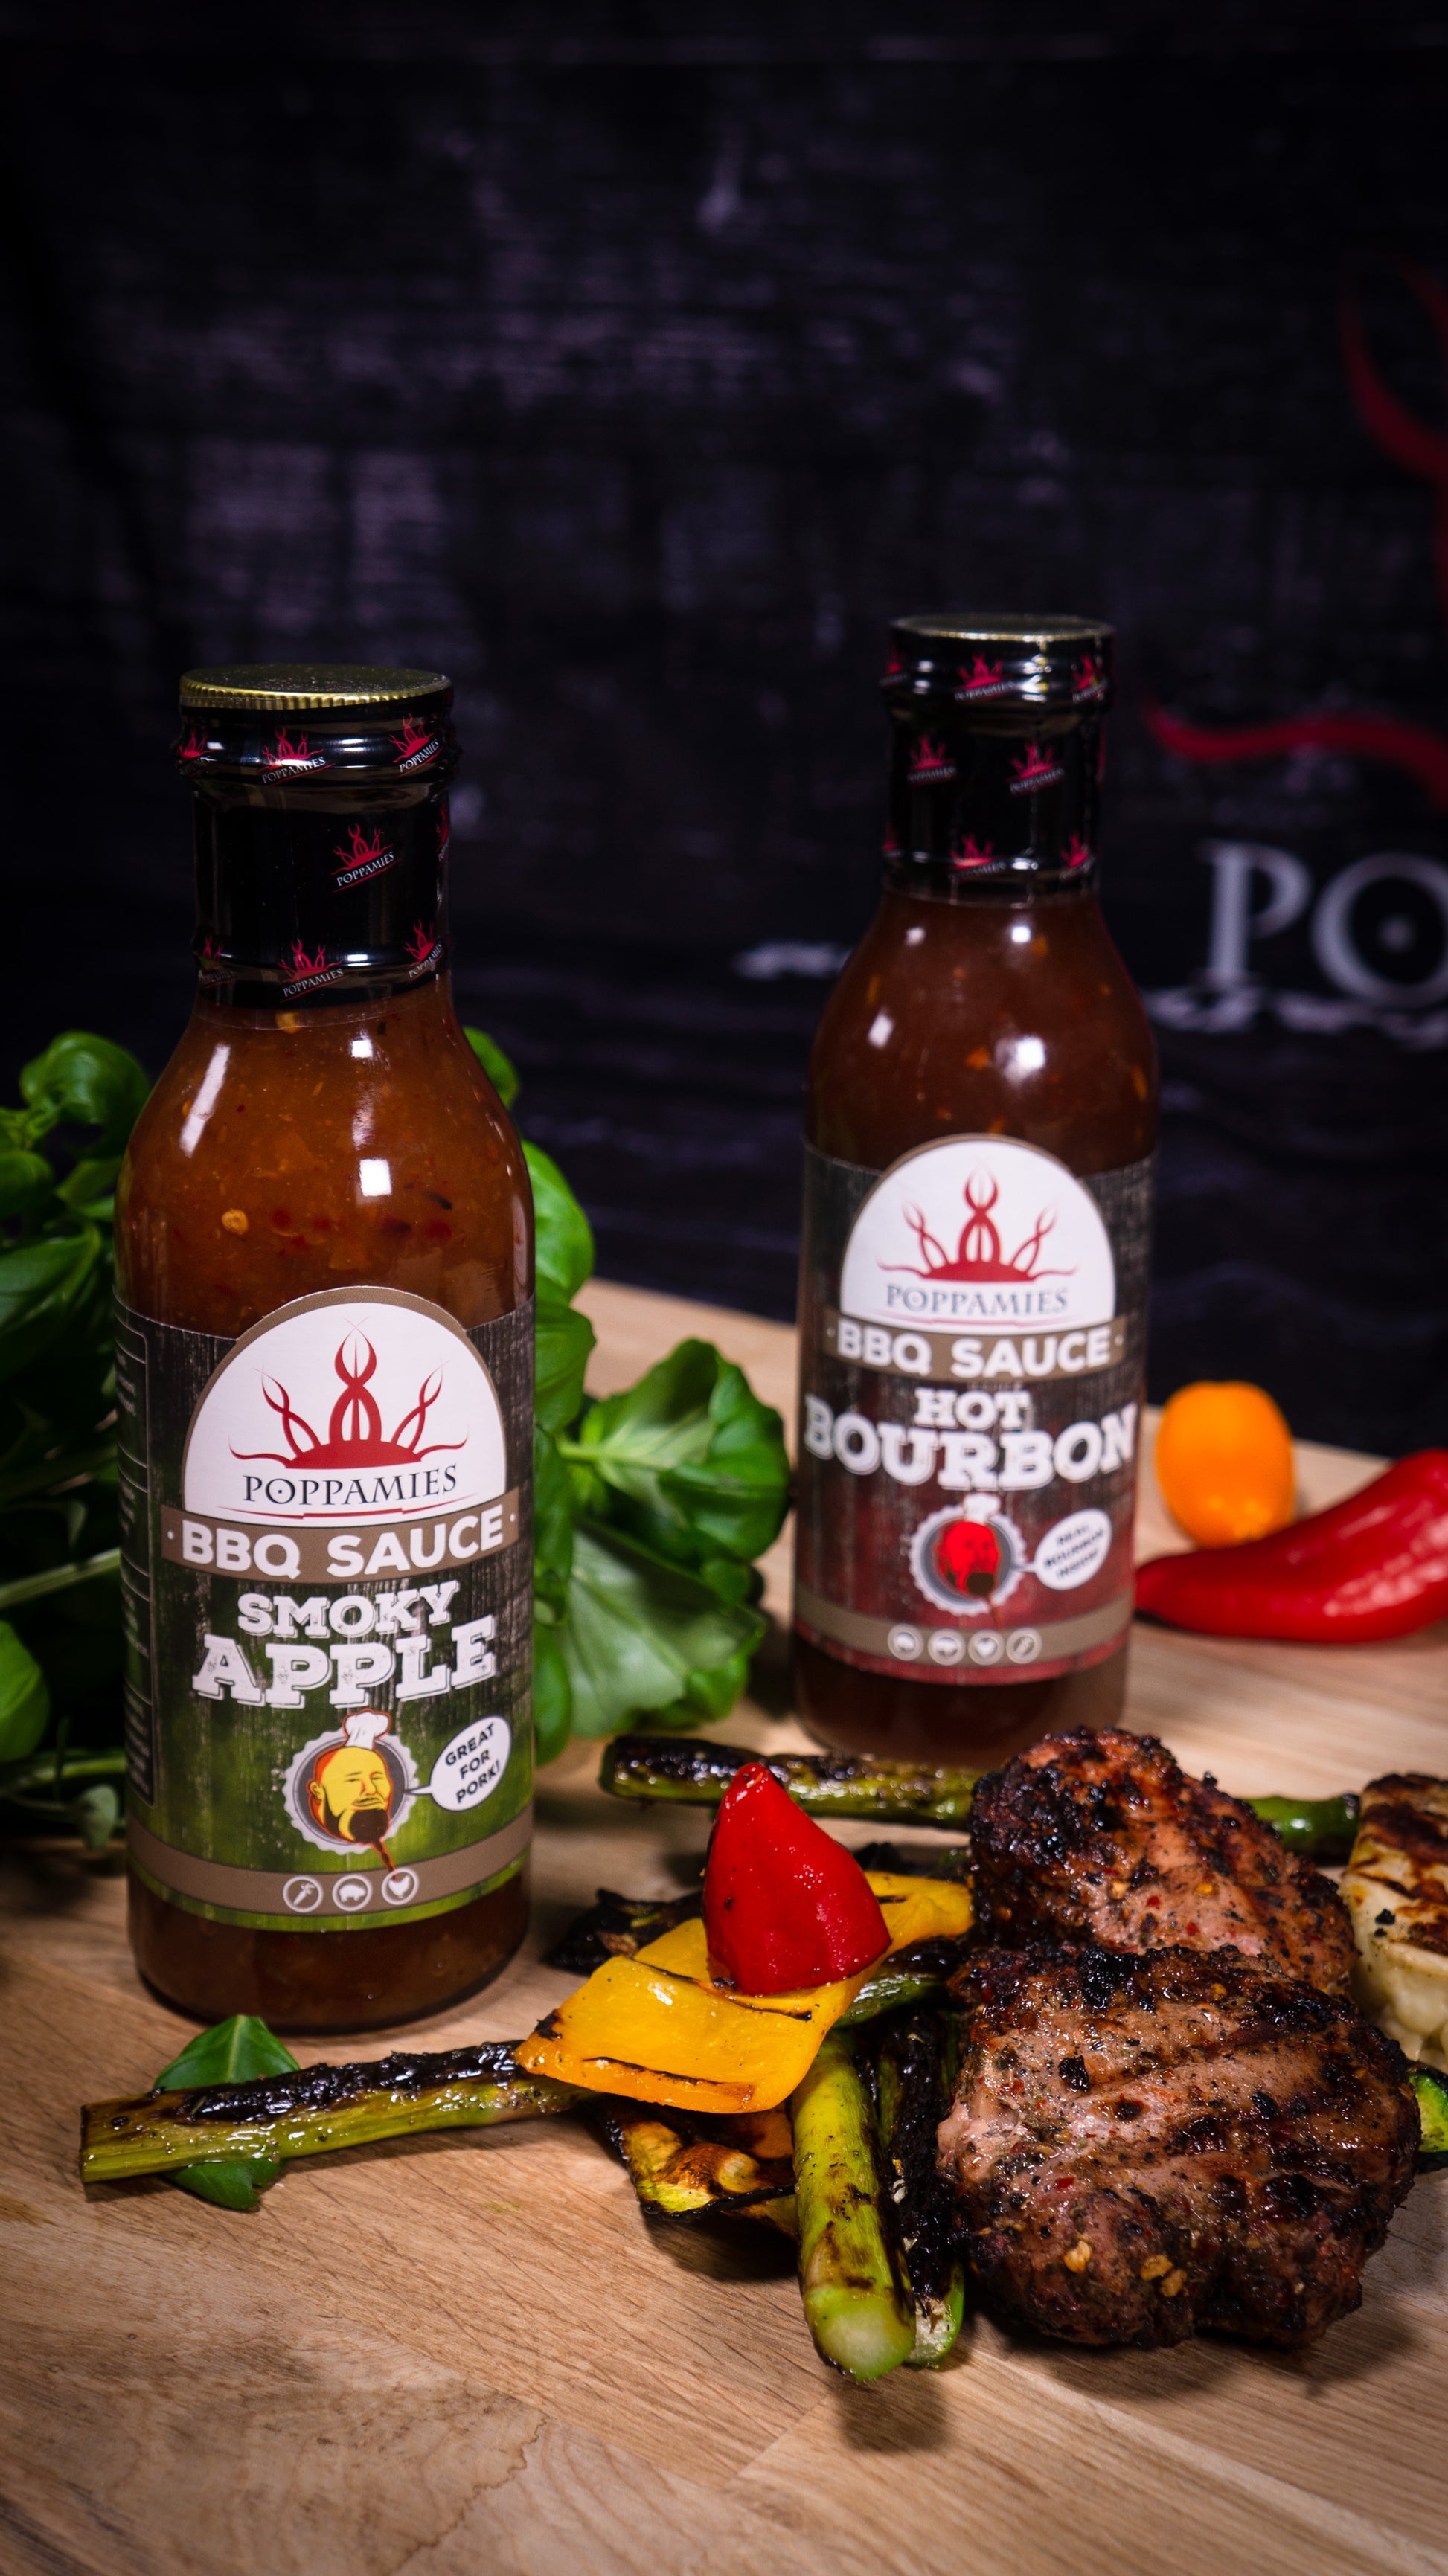 Poppamies BBQ Sauce Hot Bourbon - Well-suited for grilled food and burgers and for use as a dip and cooking sauce - Spiciness 6/10 - 410g - Lukata LTD